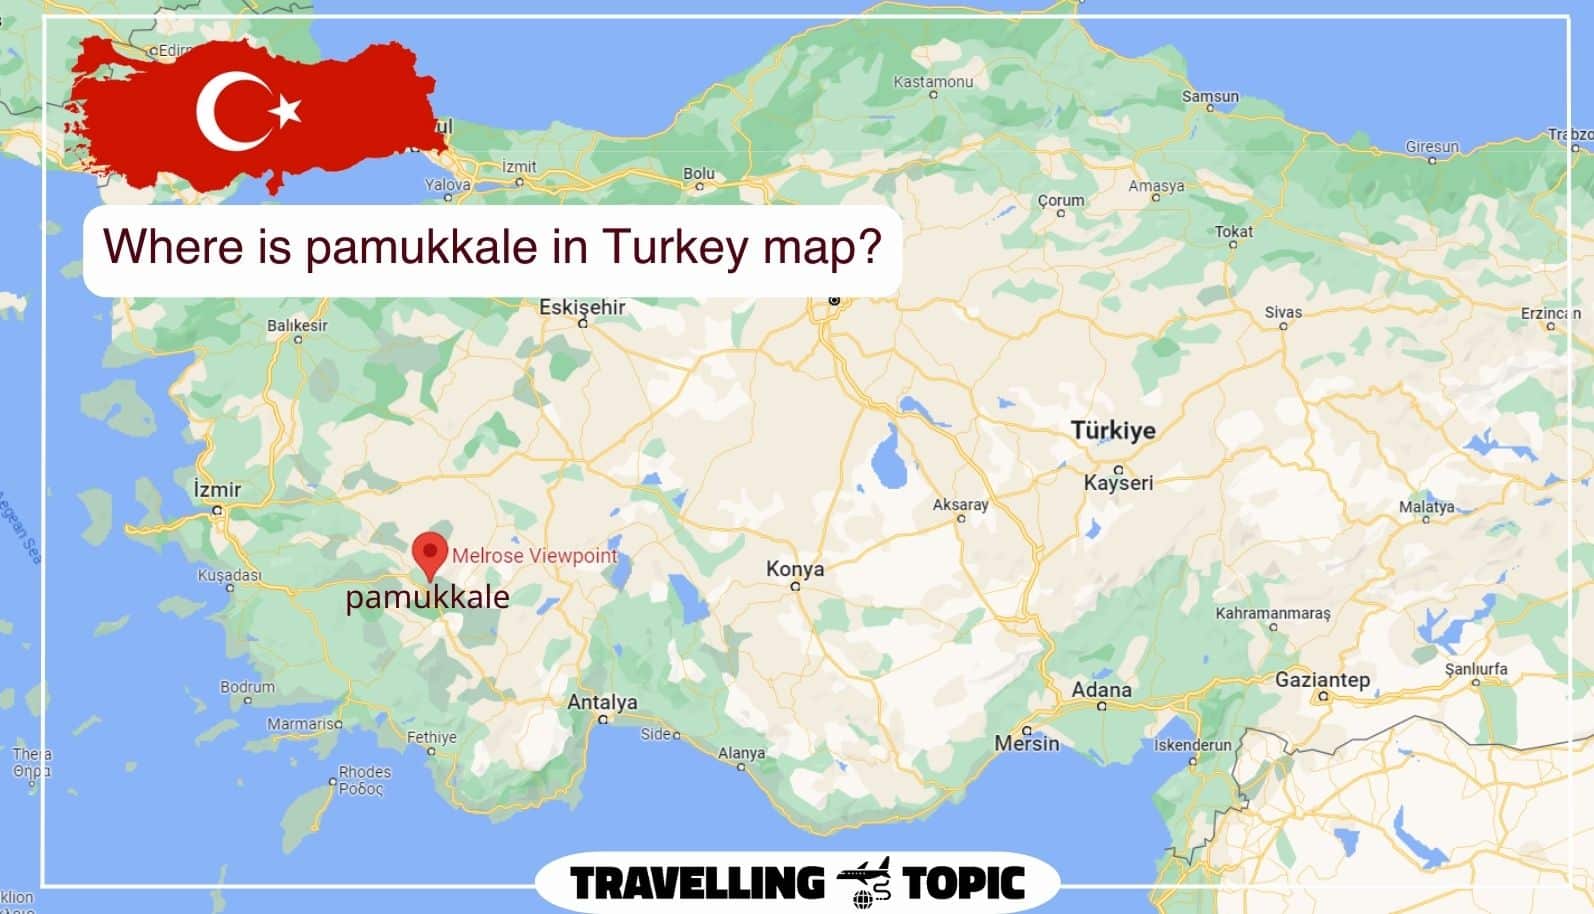 Where is pamukkale in Turkey map